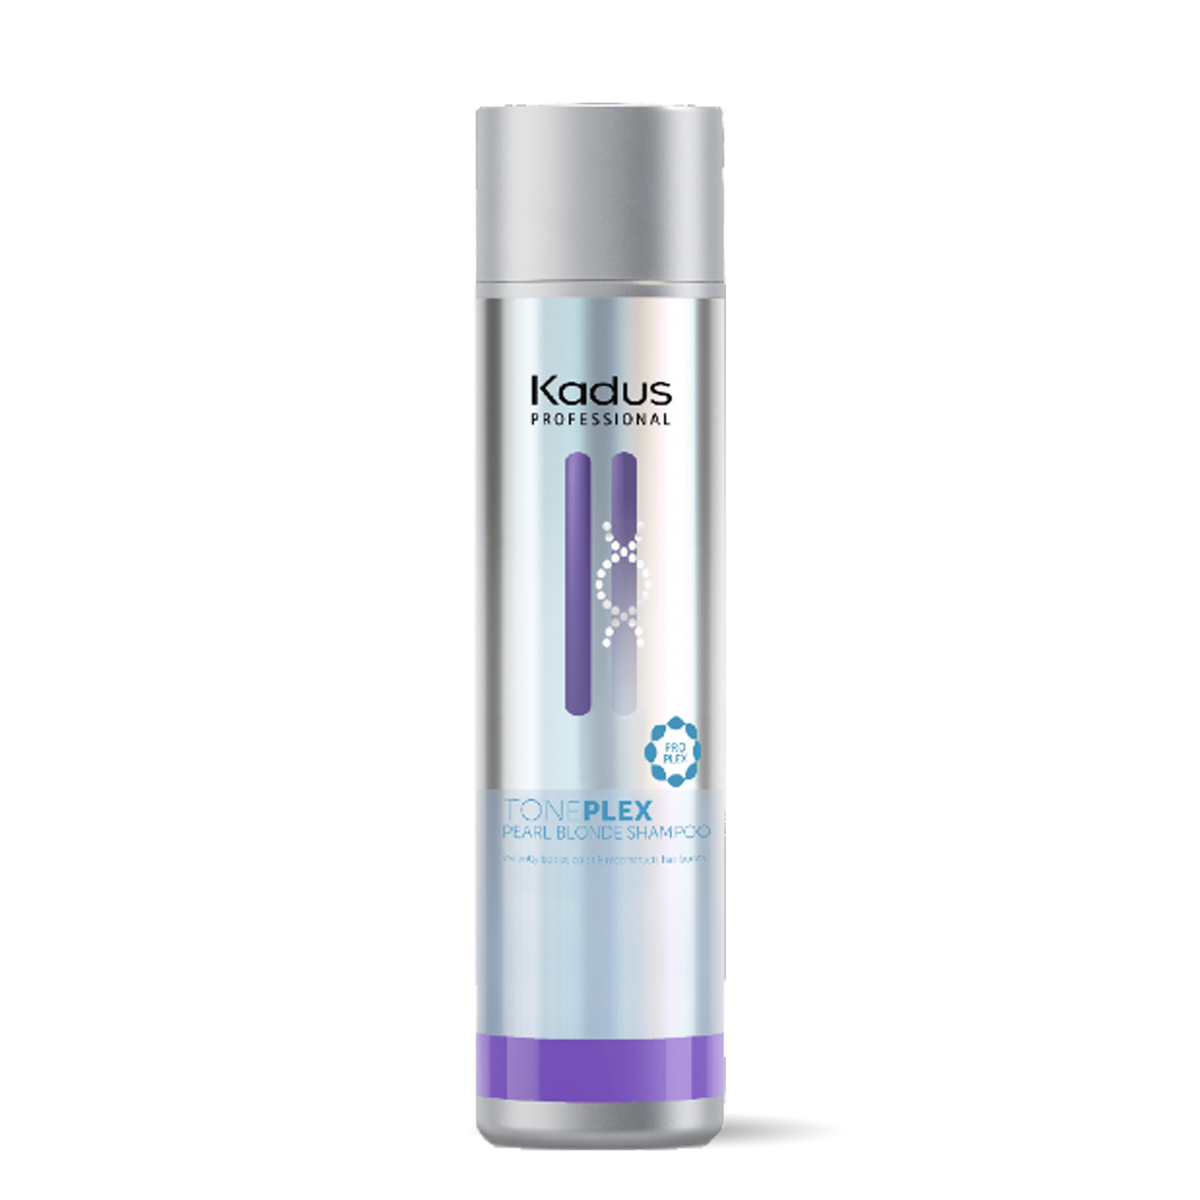 Kadus Toneplex Pearl Blonde Shampoo 250ml - by Kadus Professionals |ProCare Outlet|